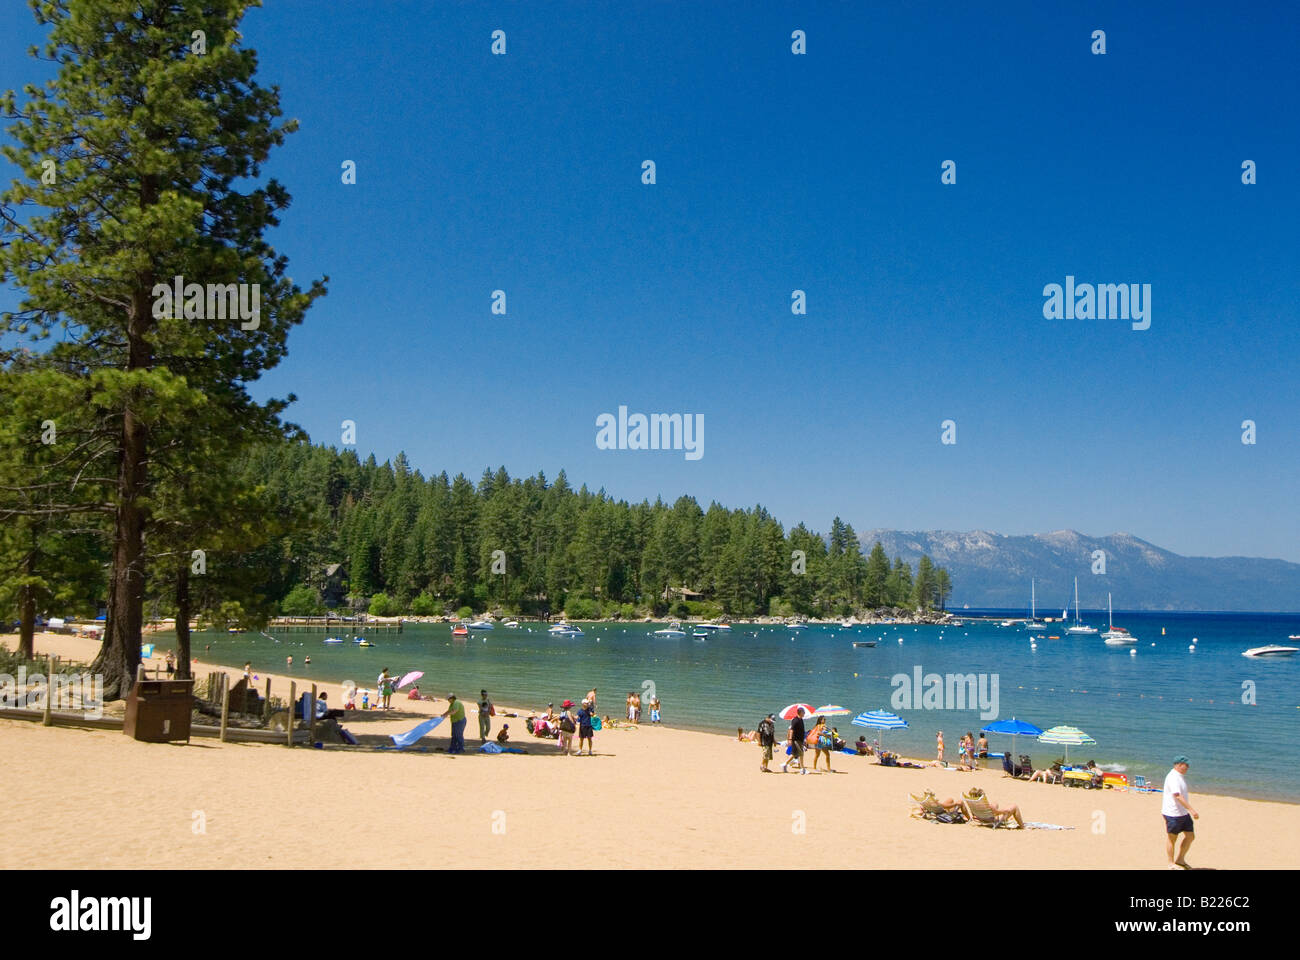 Zephyr Cove Beach South Lake Tahoe Nevada Banque D'Images